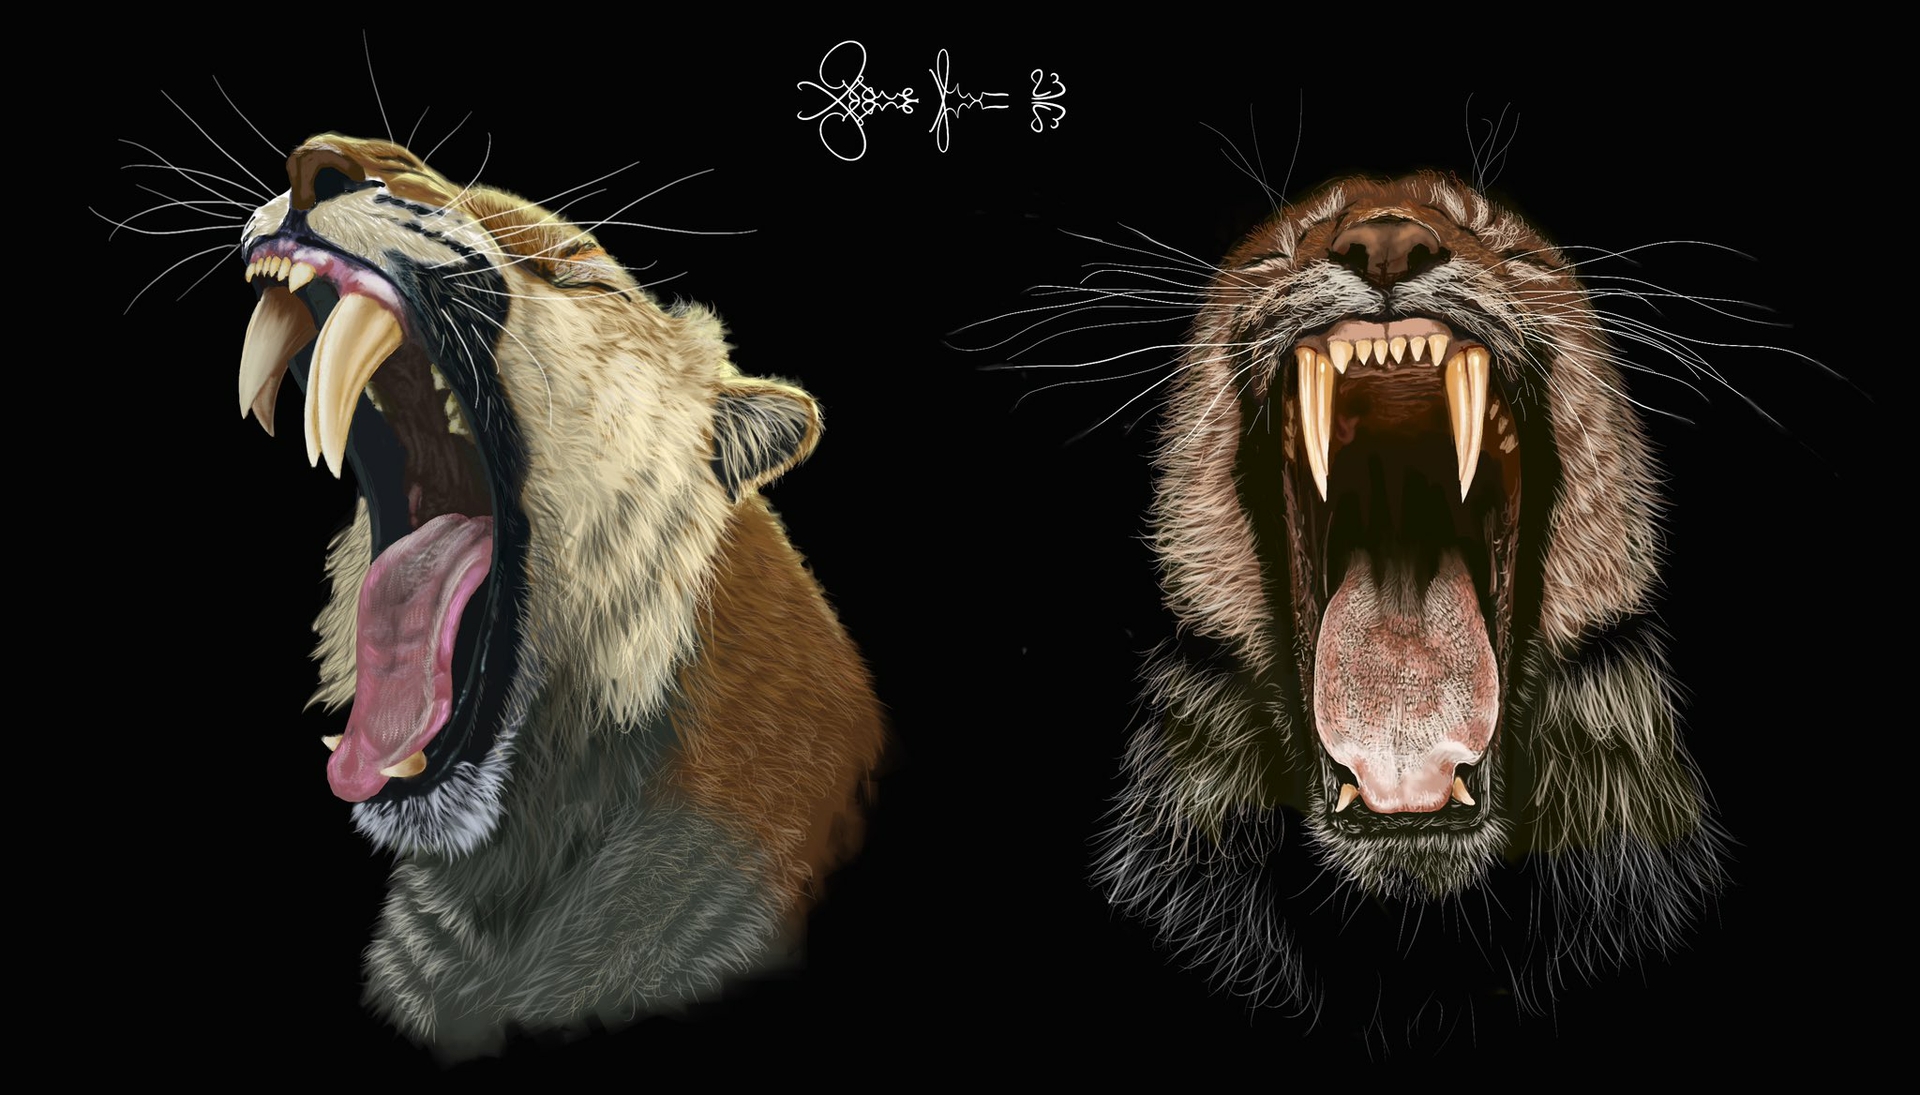 Illustrations show saber-toothed cats with two saber teeth on each side of their mouth, one adult and one baby.